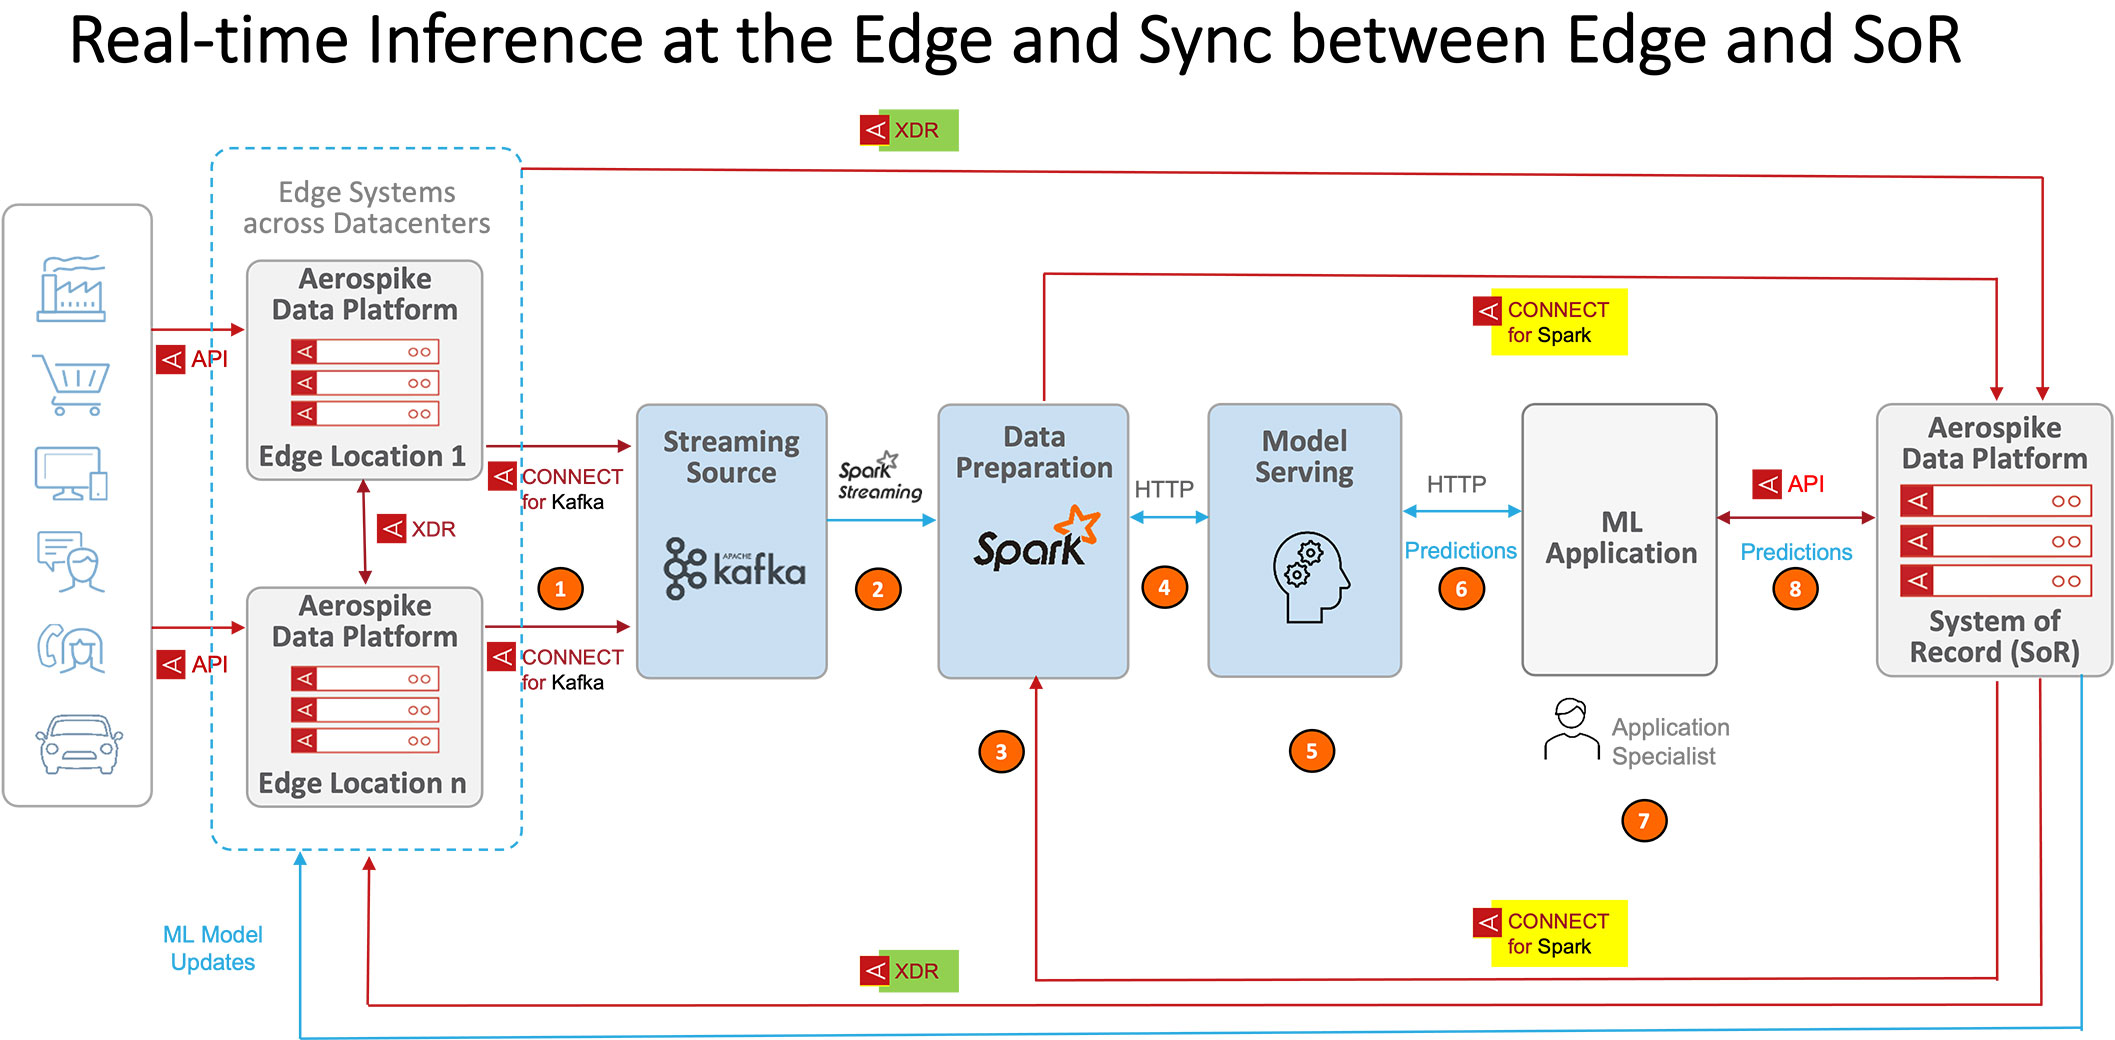 blog-diagram-Real-time-Inference-at-the-Edge-and-Sync-between-Edge-and-SoR